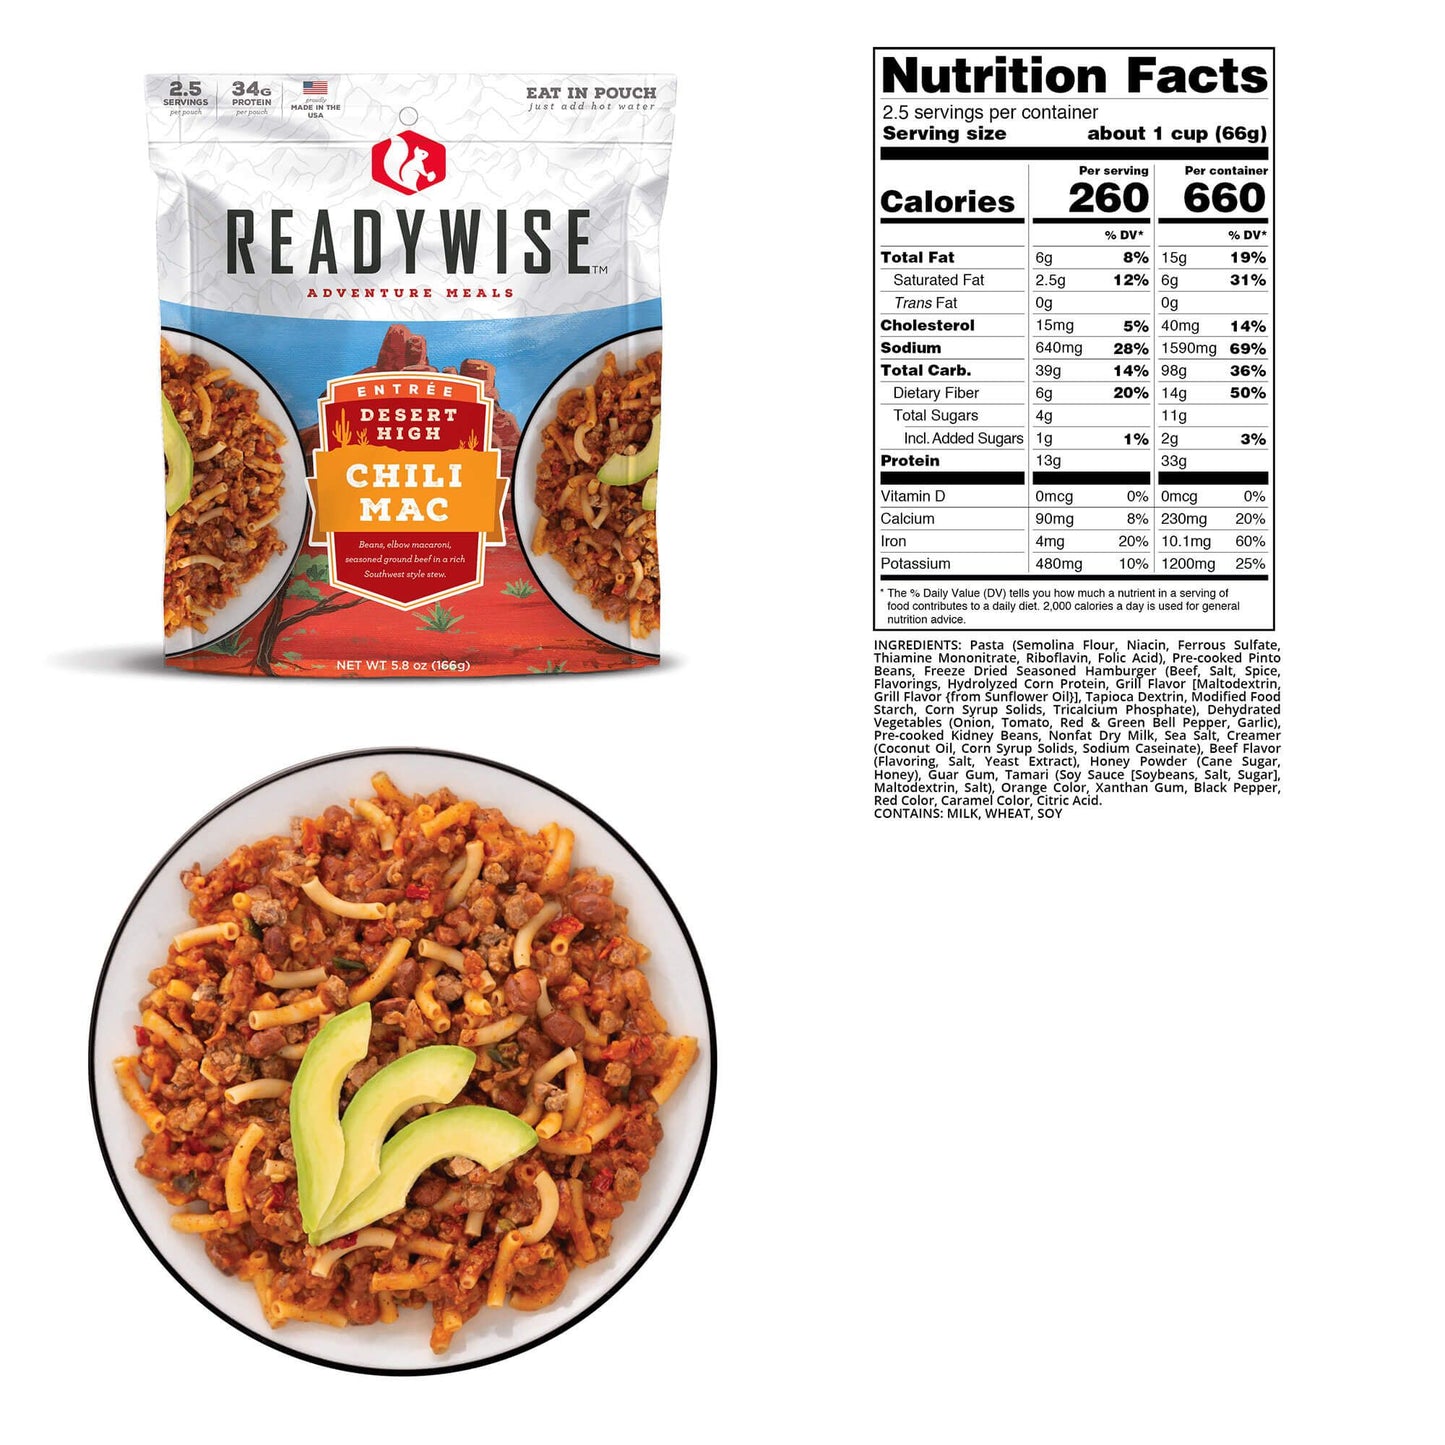 ReadyWise 6 Pack Desert High Chili Mac with Beef